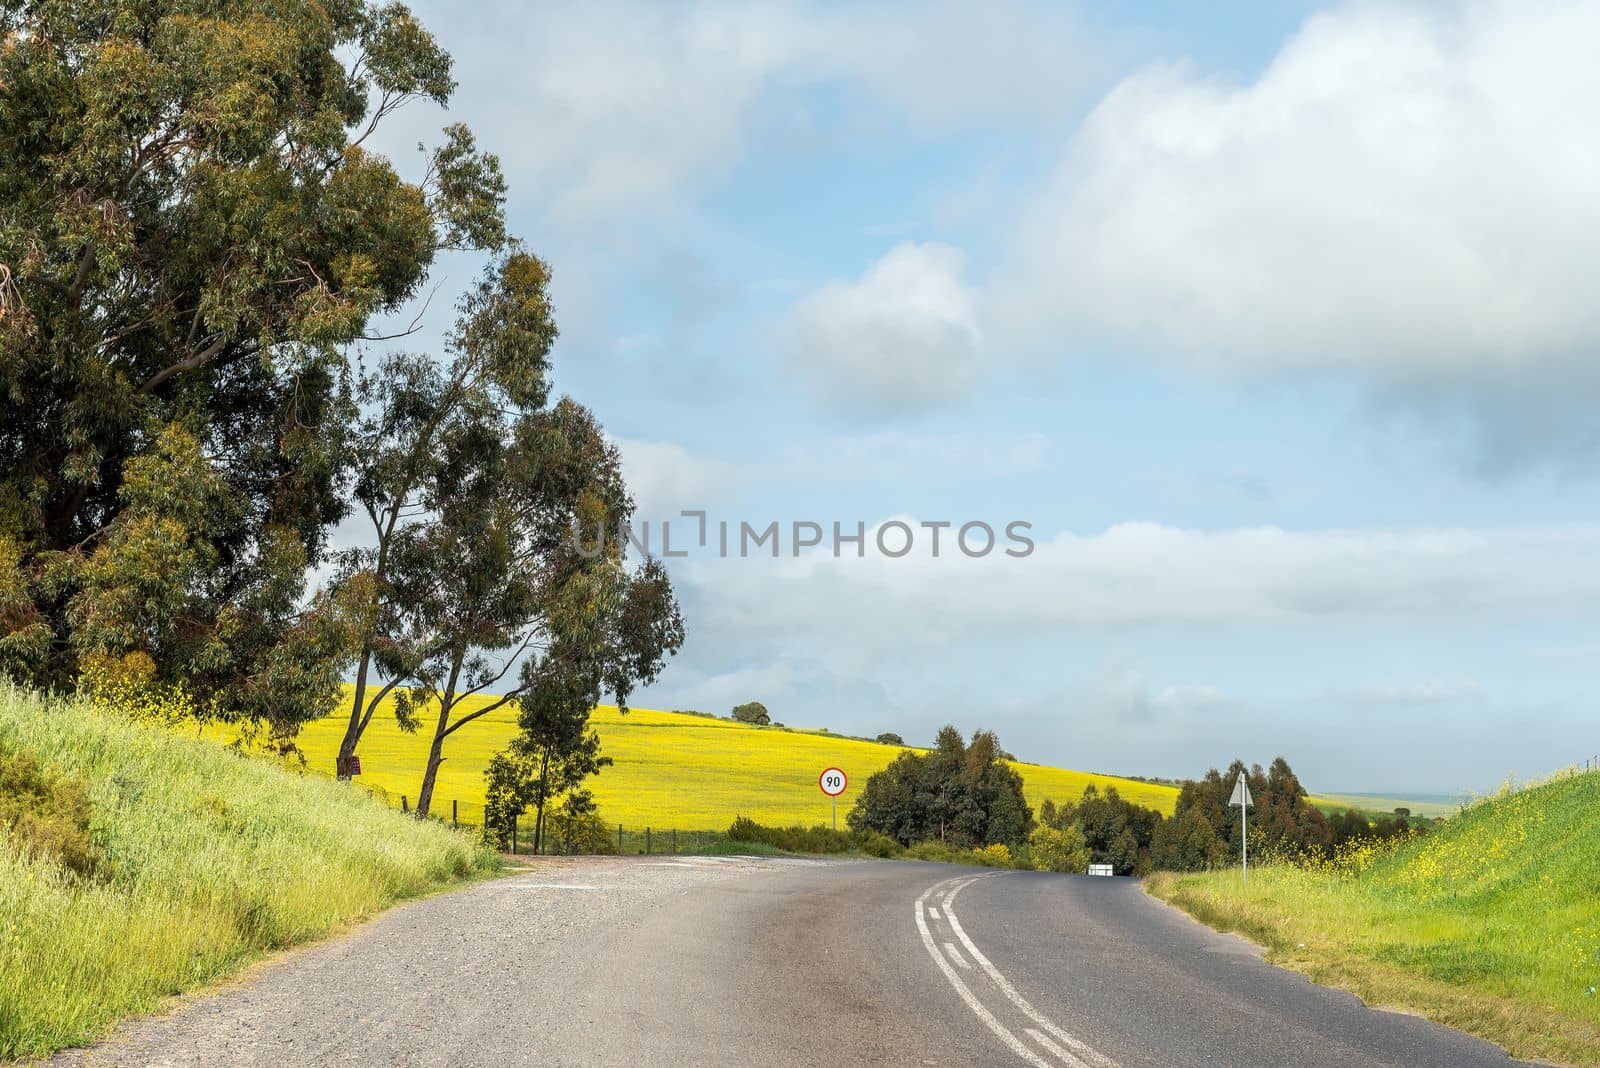 Yellow canola fields next to Malanshoogte Road near Durbanville in the Western Cape Province